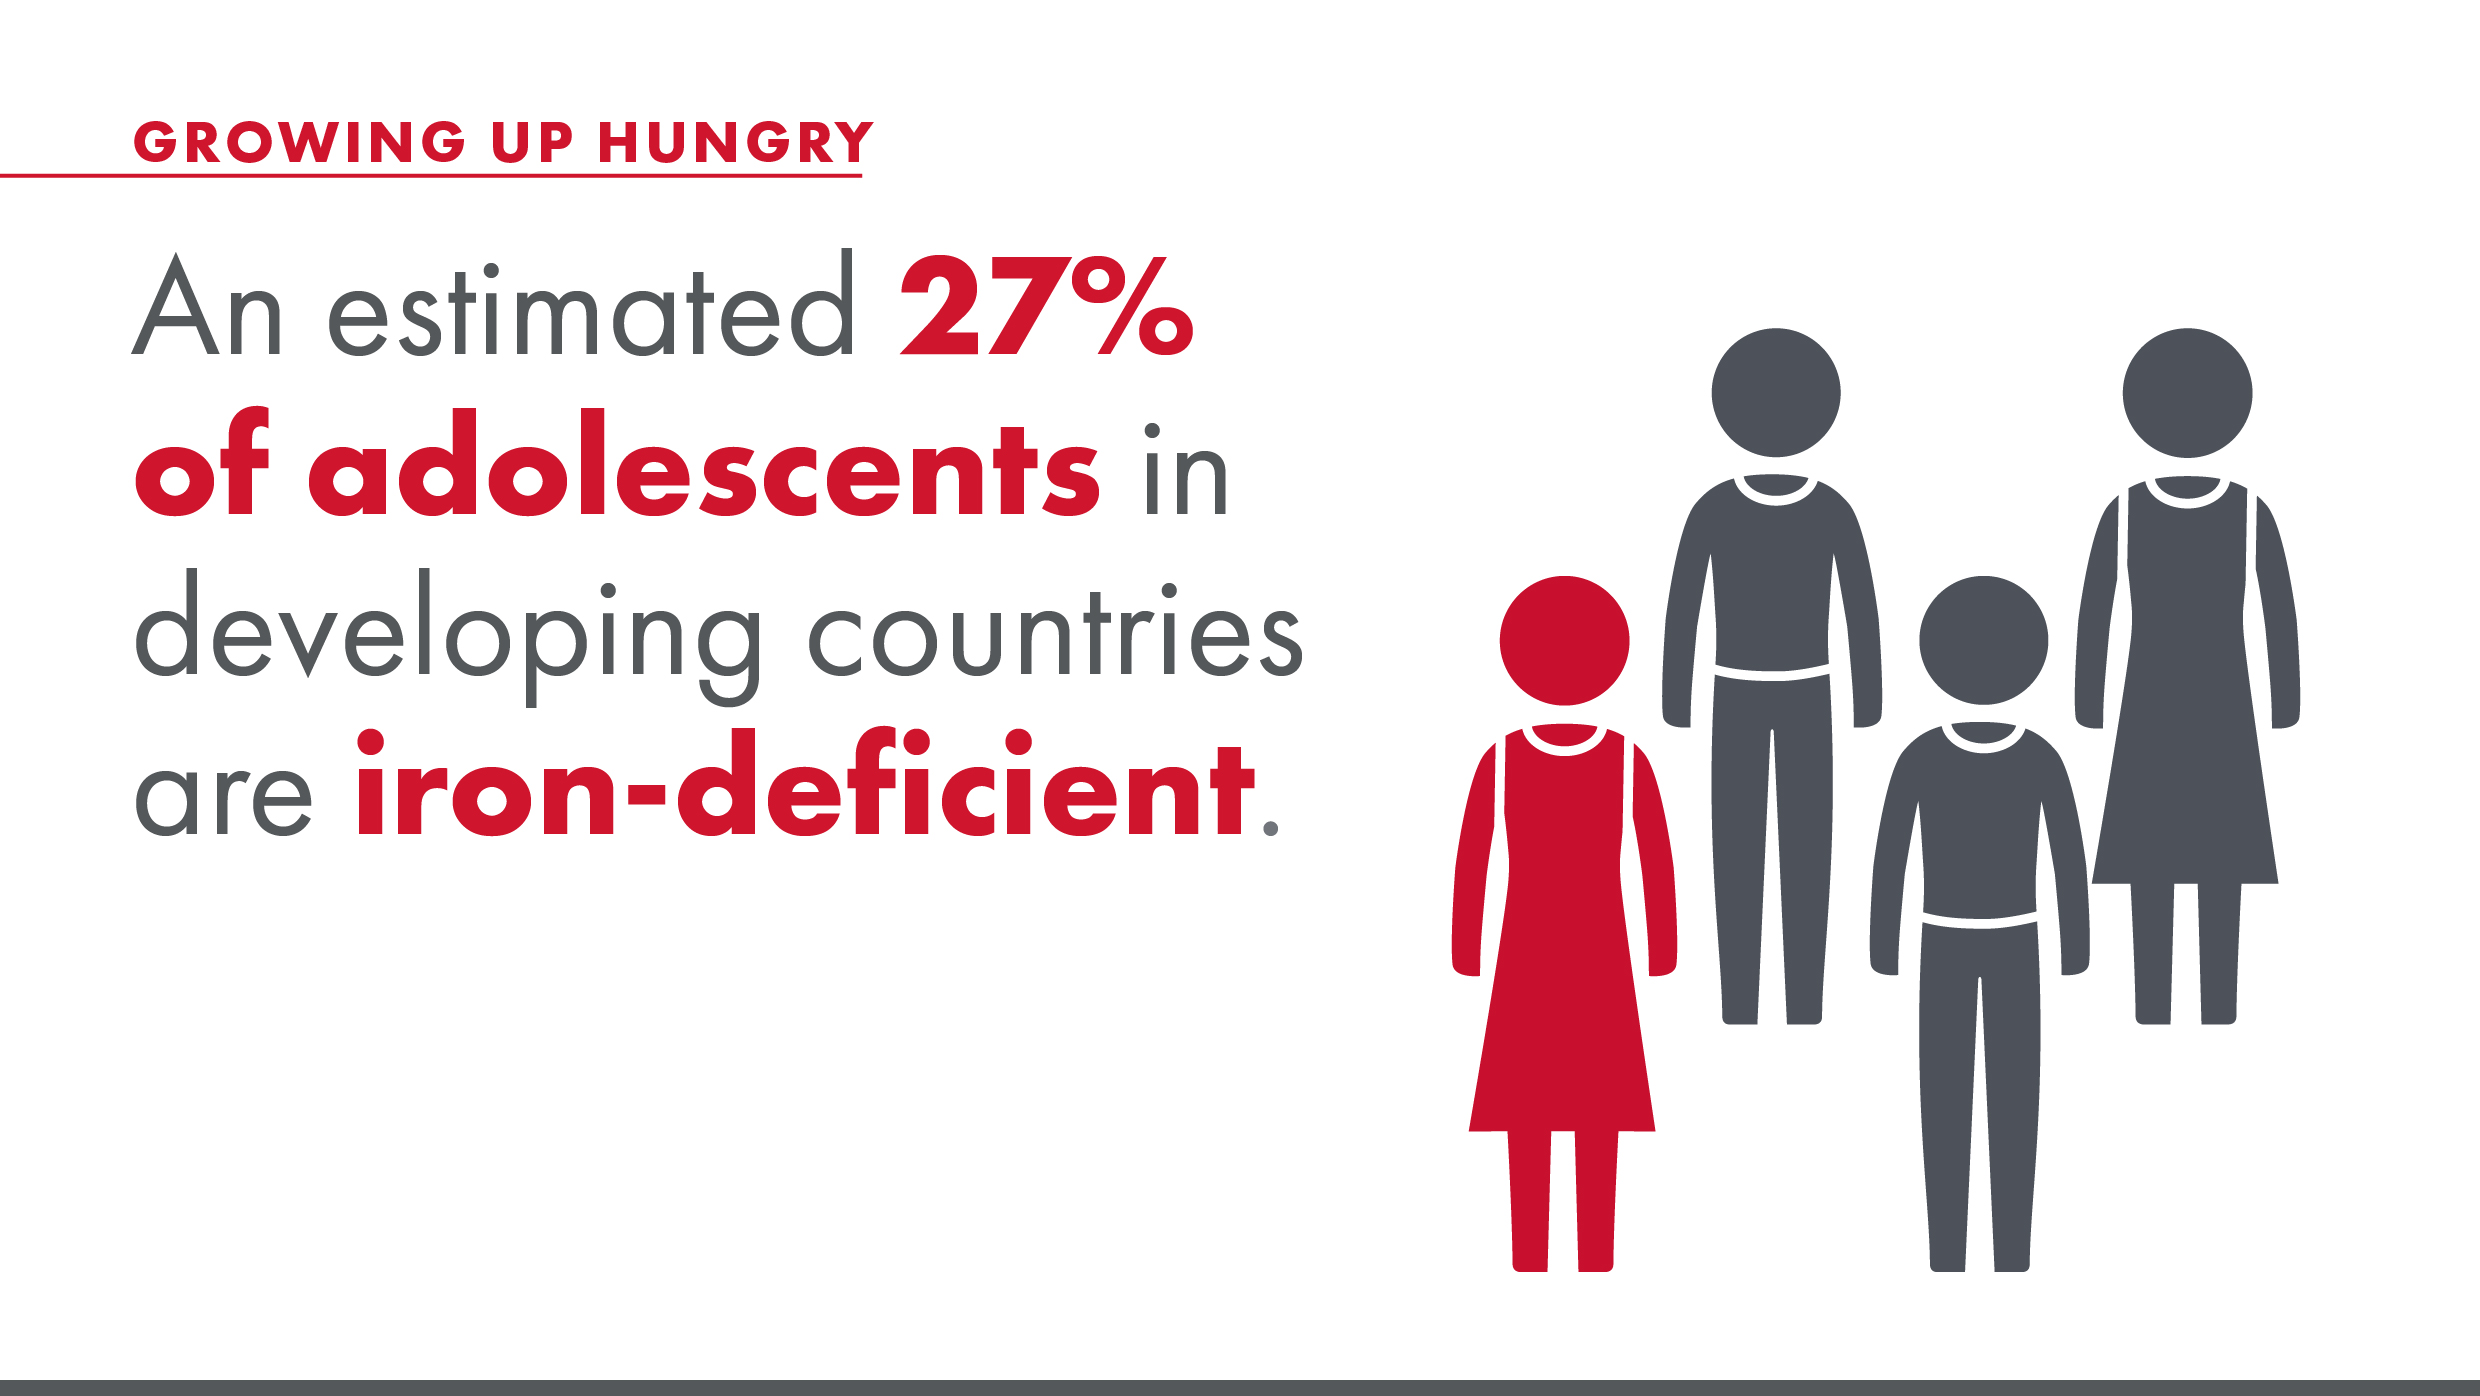 An estimated 27% of adolescents in developing countries are iron-deficient.